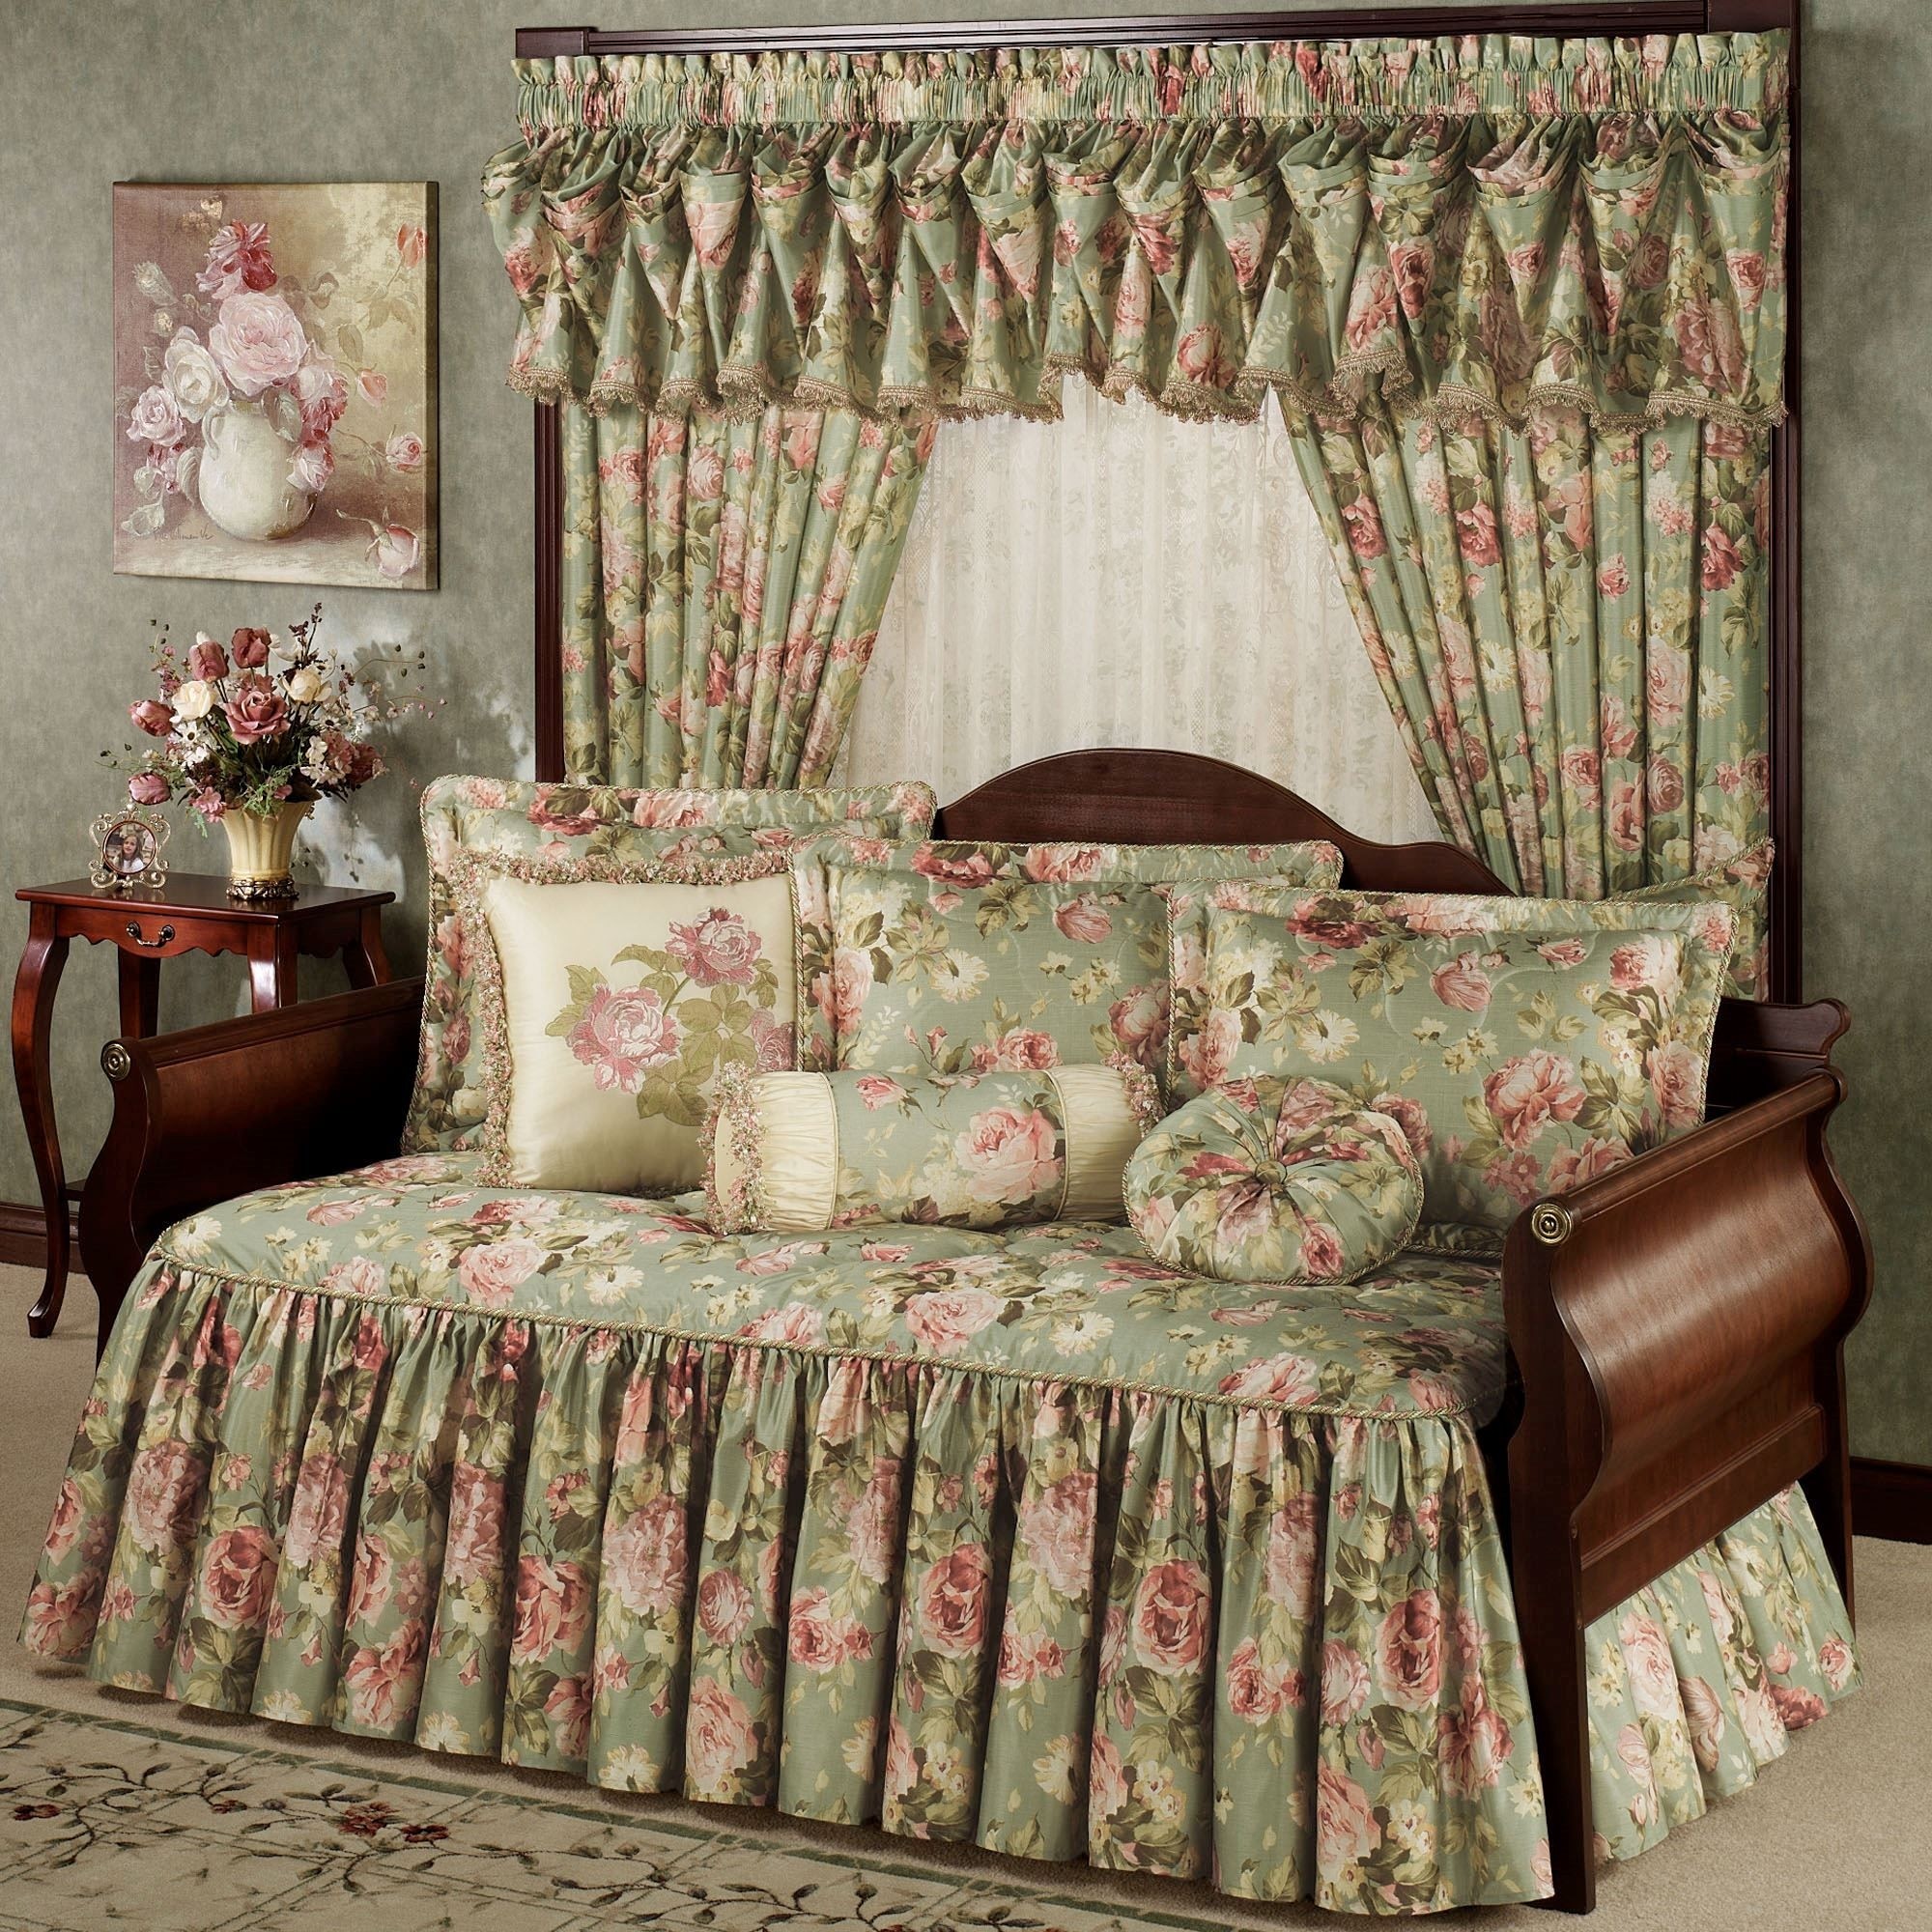 Daybed bedding set includes a floral daybed cover and three